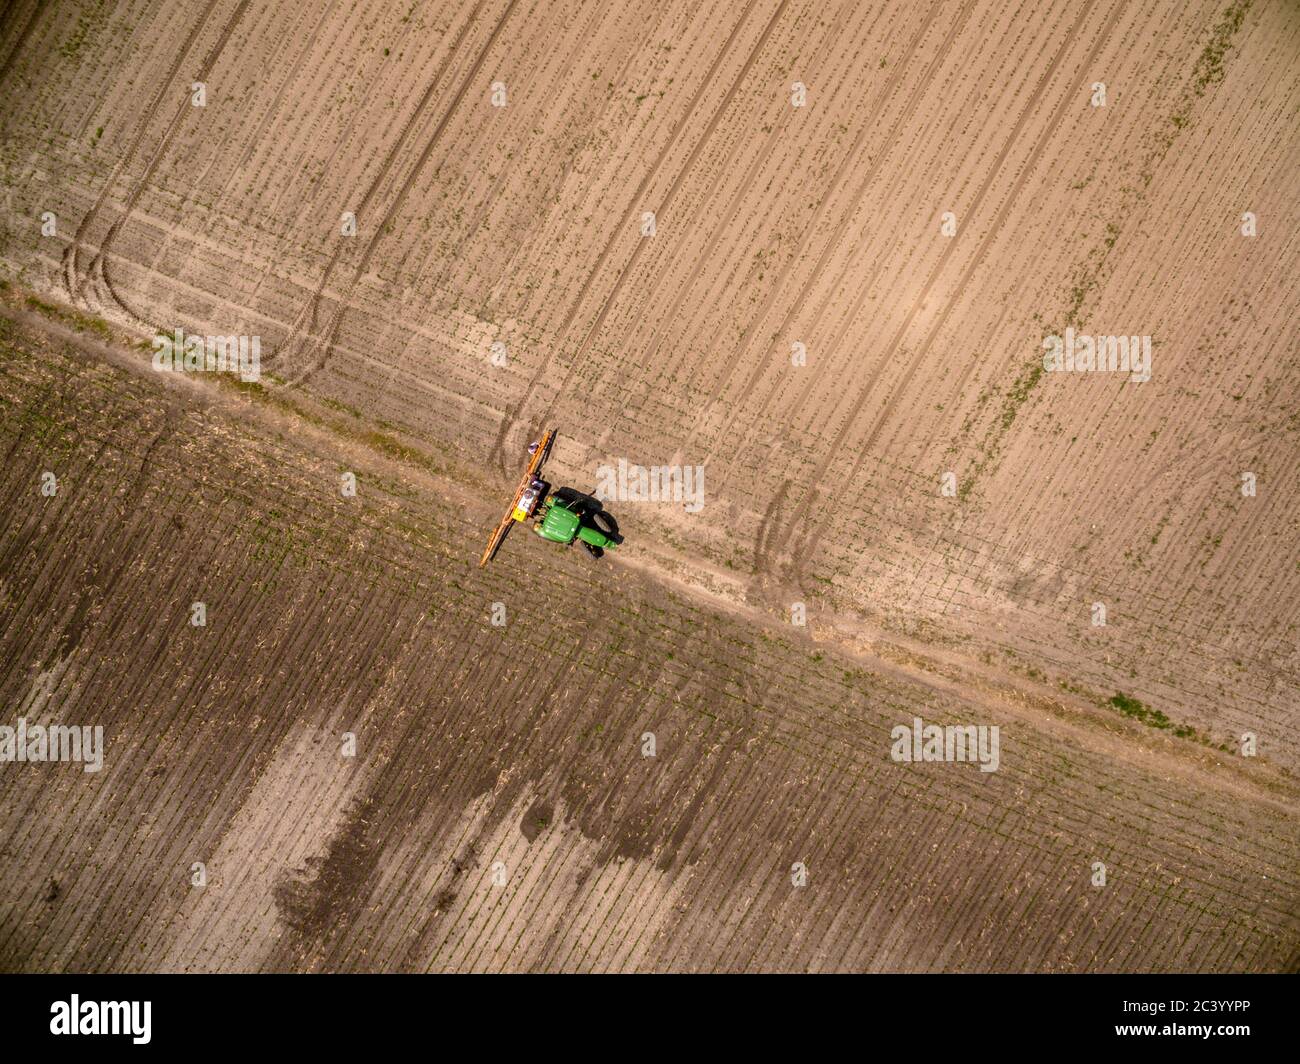 Aerial view on an agricultural crops sprayer in a field Stock Photo